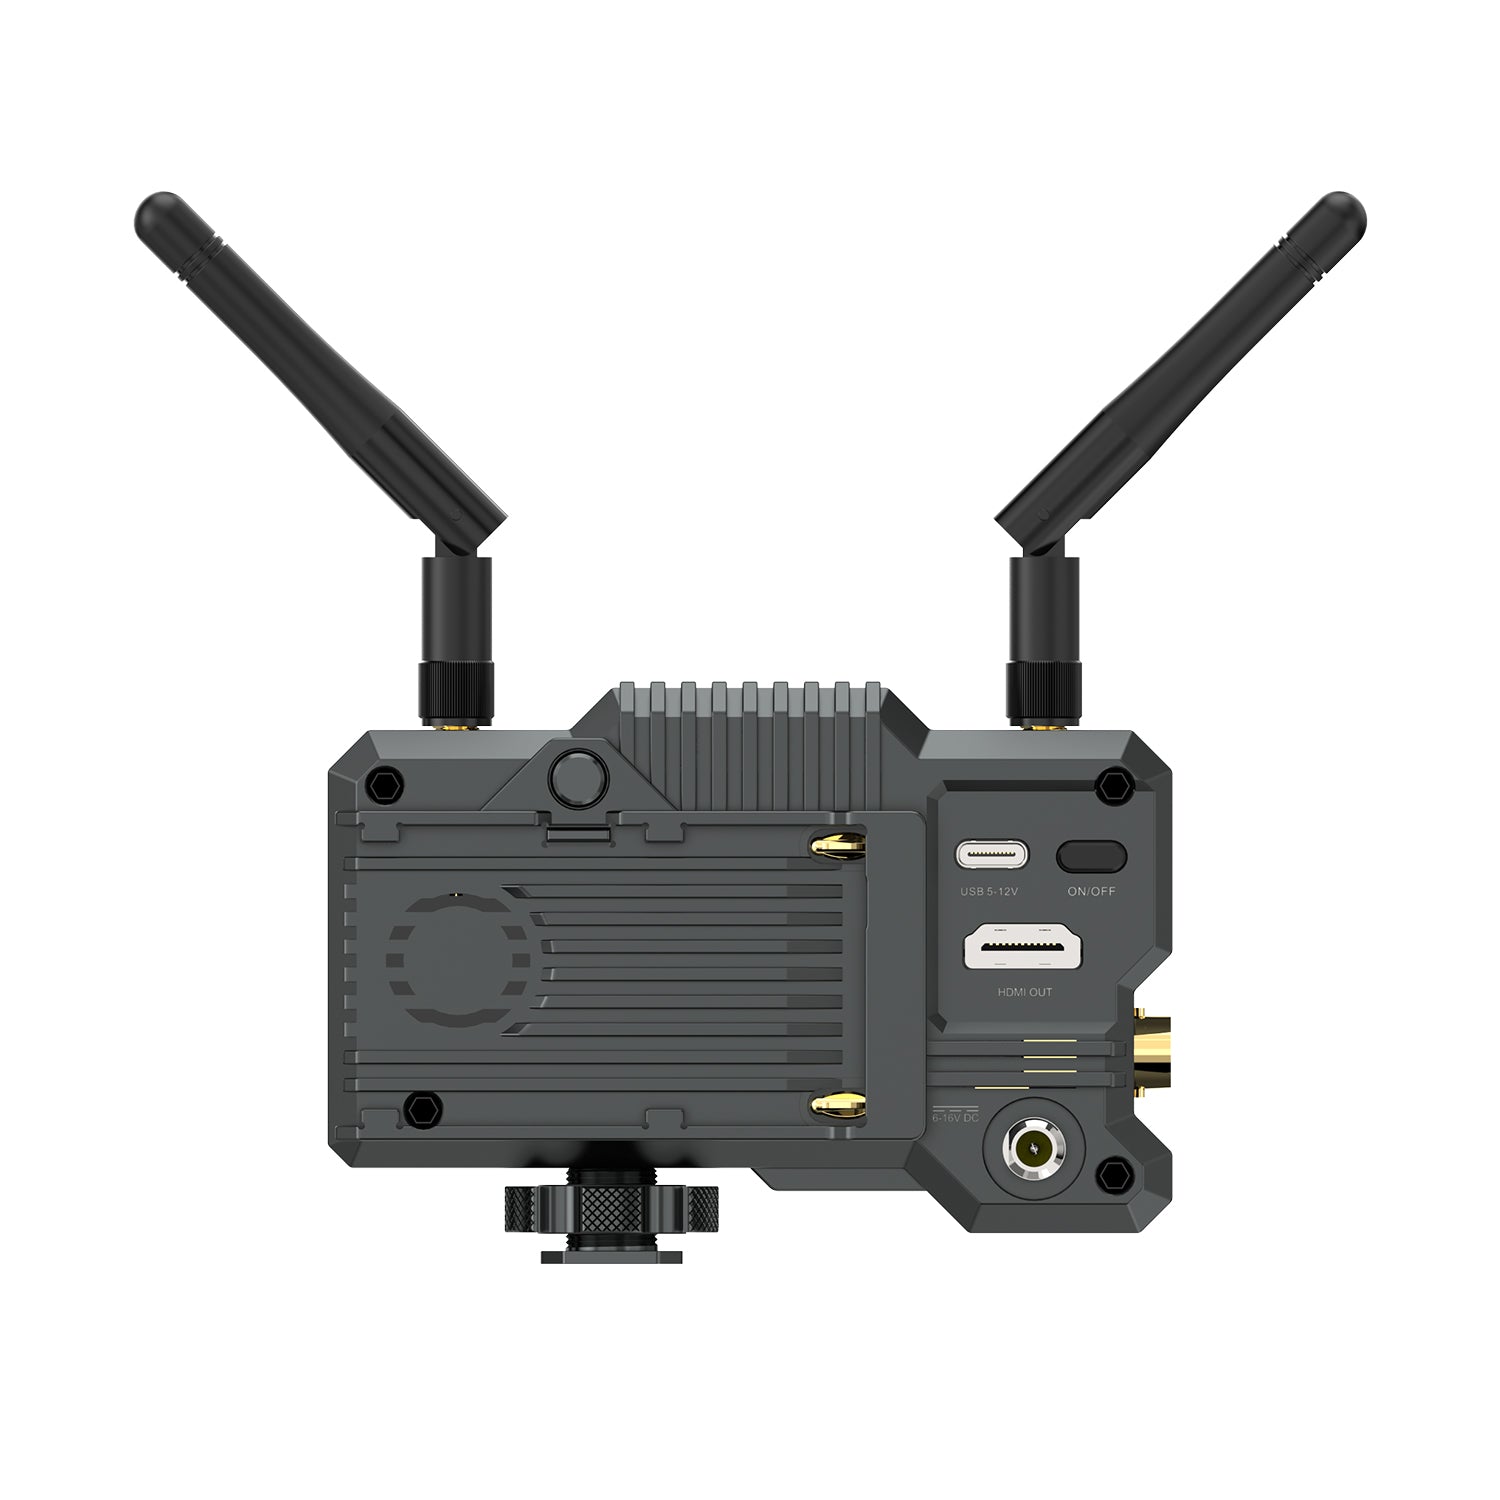 Official] Mars 400S Pro II Wireless SDI HDMI Video Transmitter and 